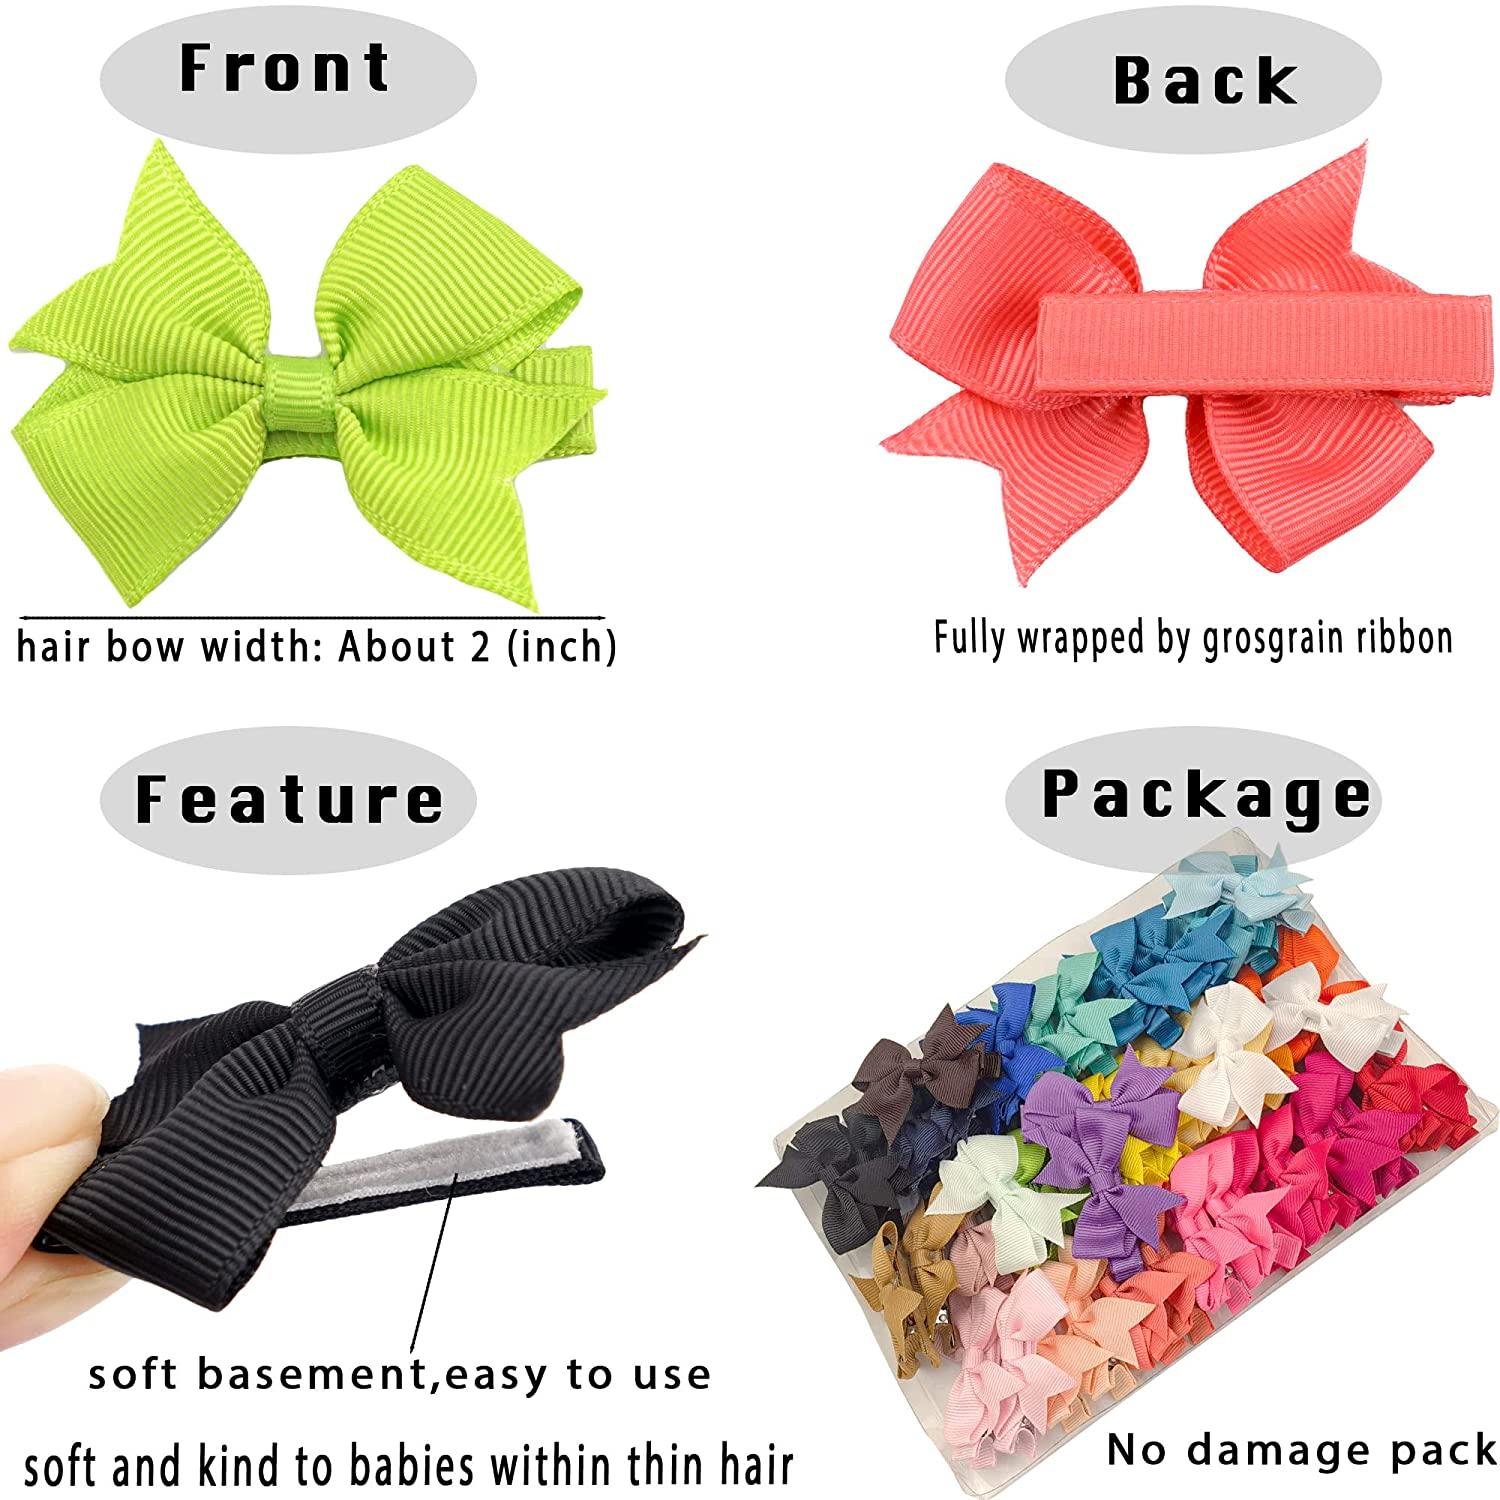 50PCS/25 Pairs Baby Hair Clips 3 Inch Grosgrain Ribbon Hair Bow Alligator  Hair Clips Hair Accessories for Infants Toddlers Kids Children Multicoloured